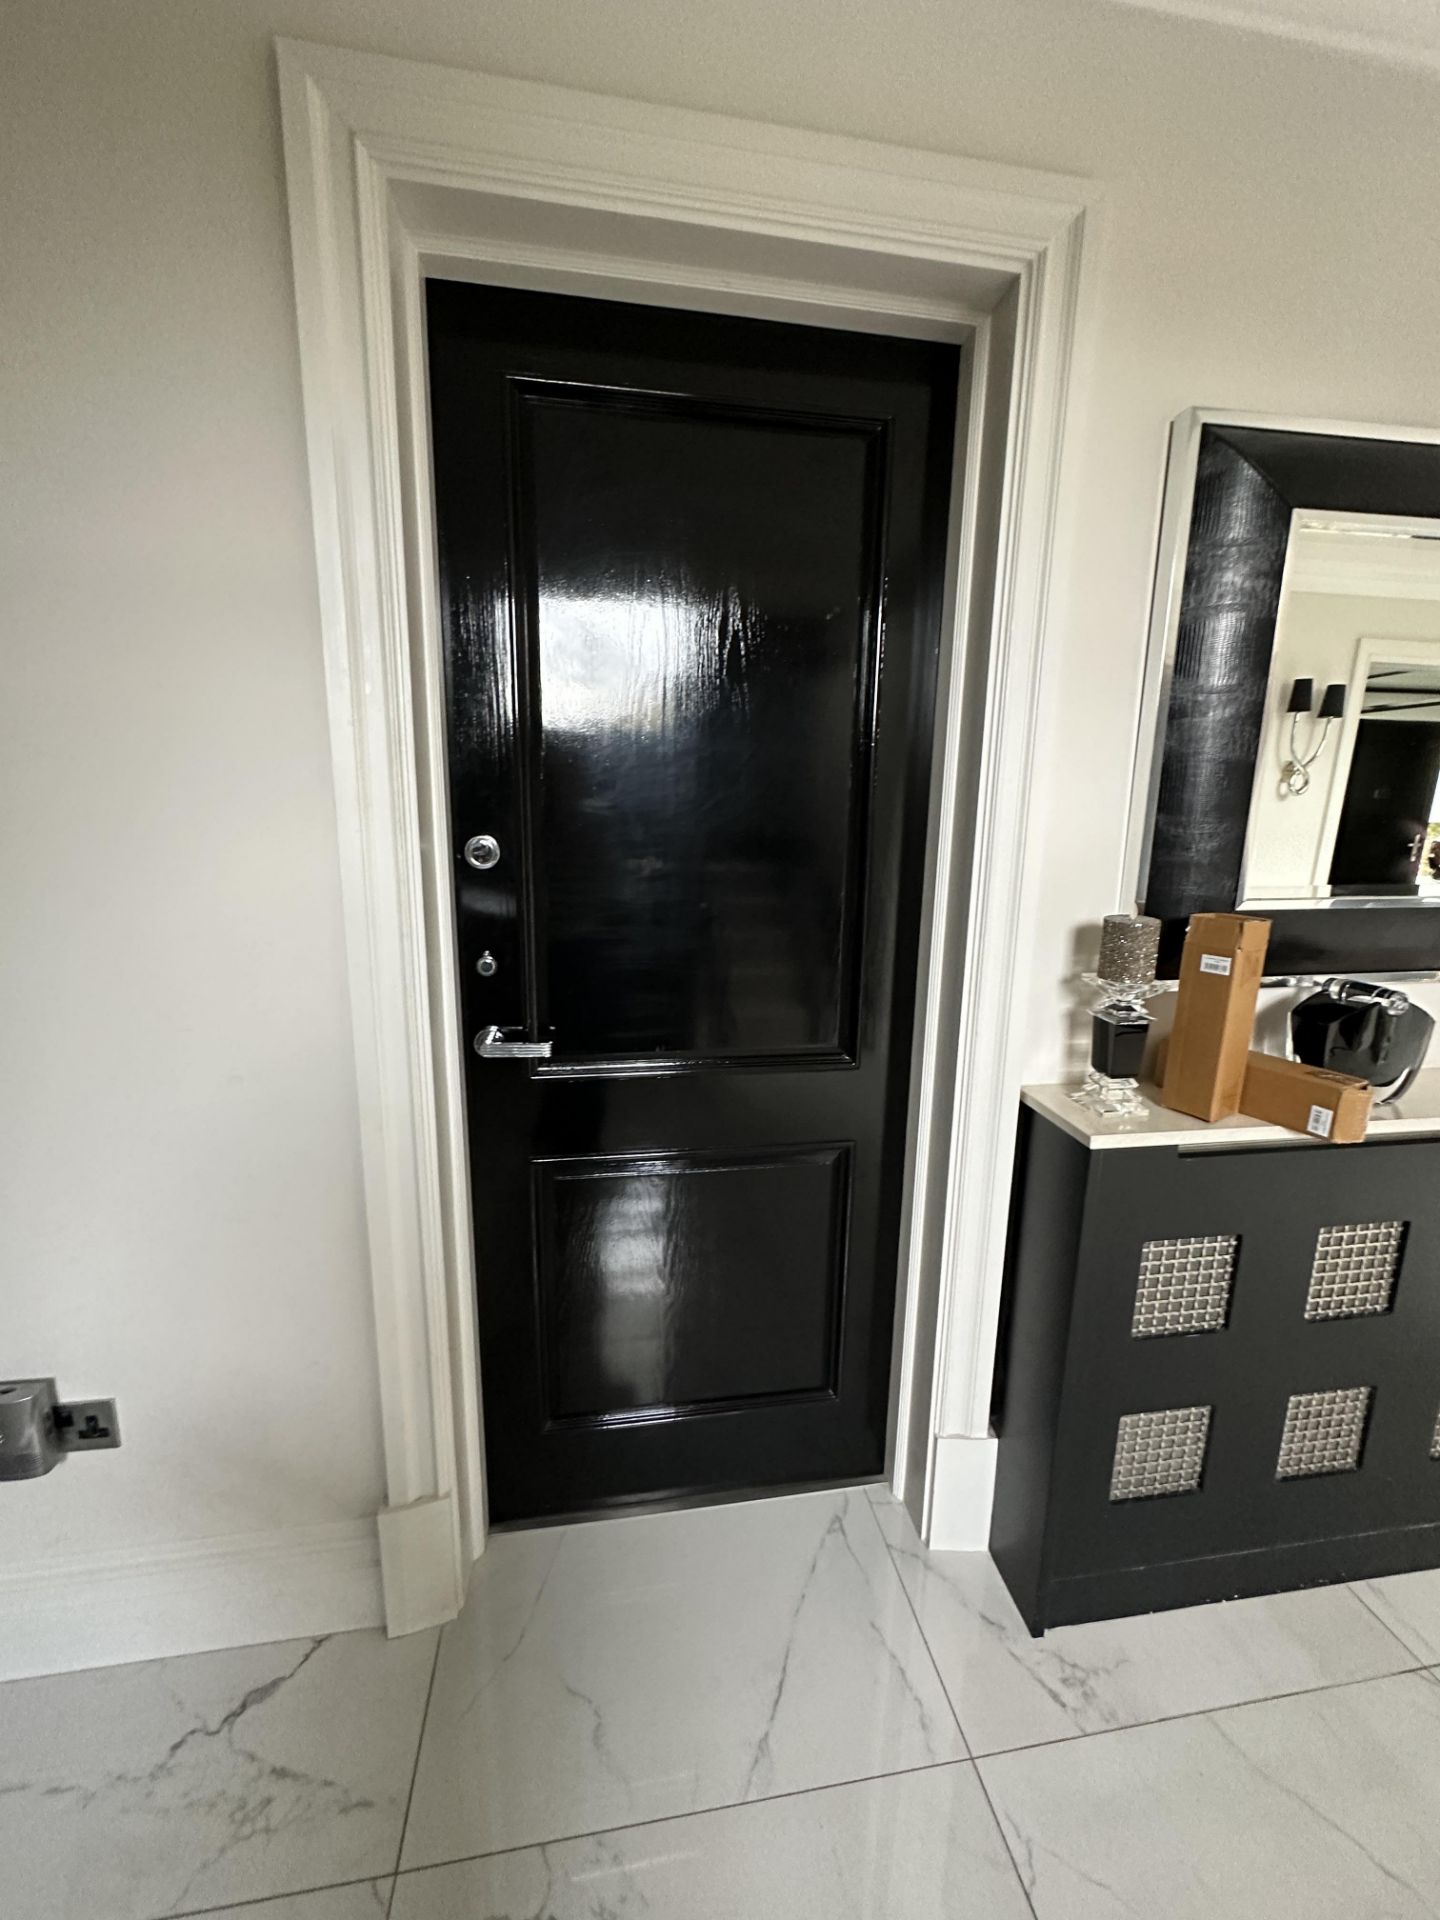 1 x SOLID OAK Fire Door In Black Gloss And Stainless Steel Hardware - Image 2 of 4